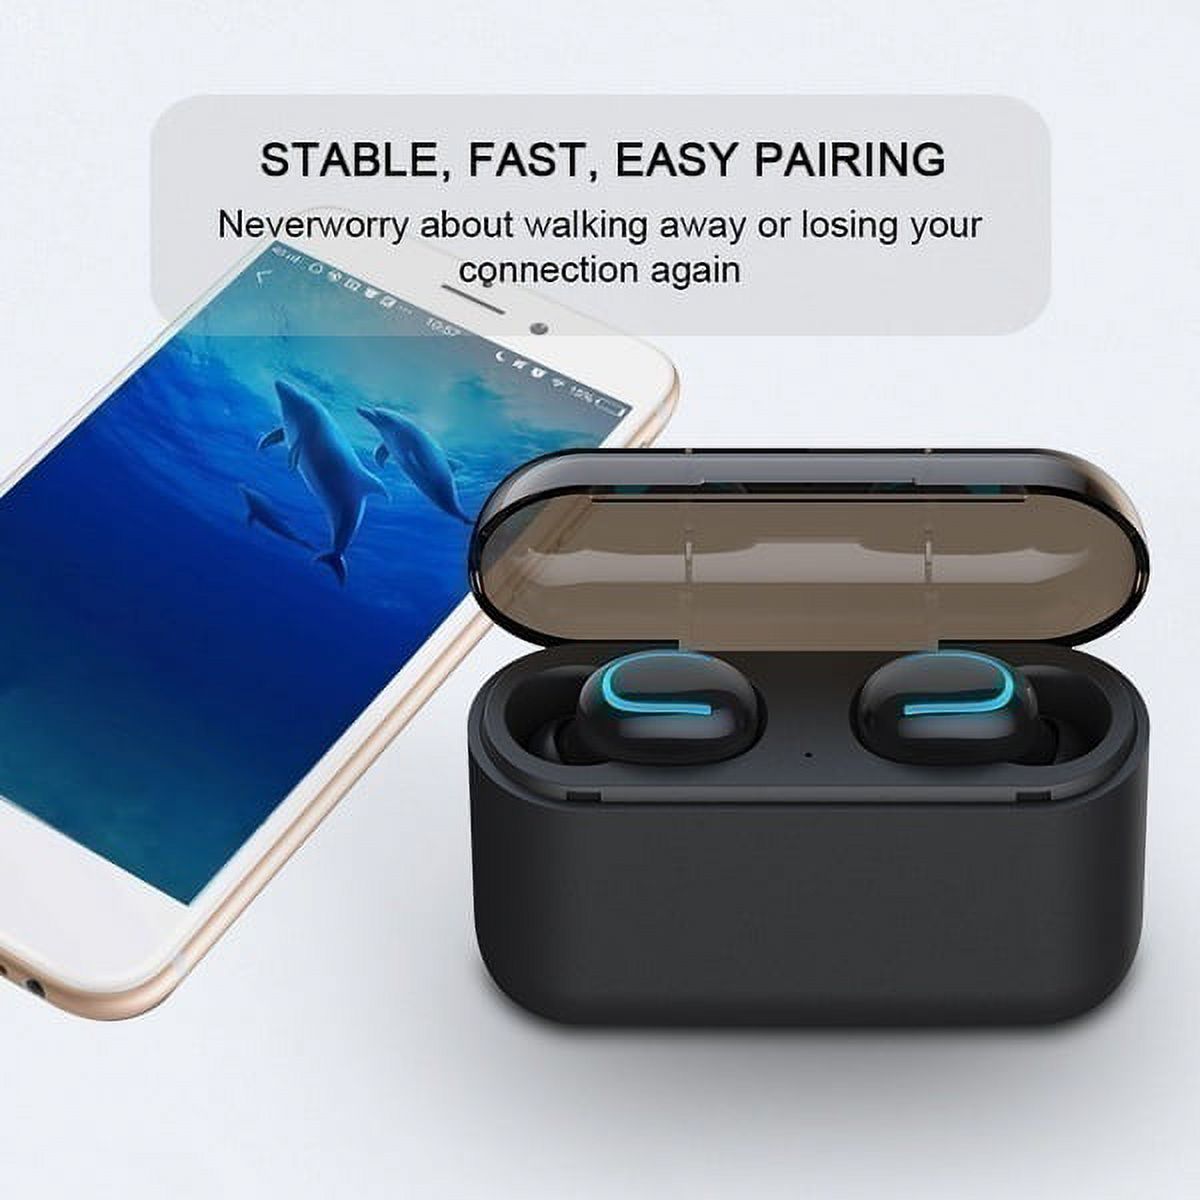 2200mAh/3500mAh Bluetooth 5.0 TWS Wireless Bluetooth Headphones In-ear Earbuds Ear Buds Twins Earphones Noise Reduction Earbud Headset with Charging Box - image 4 of 8